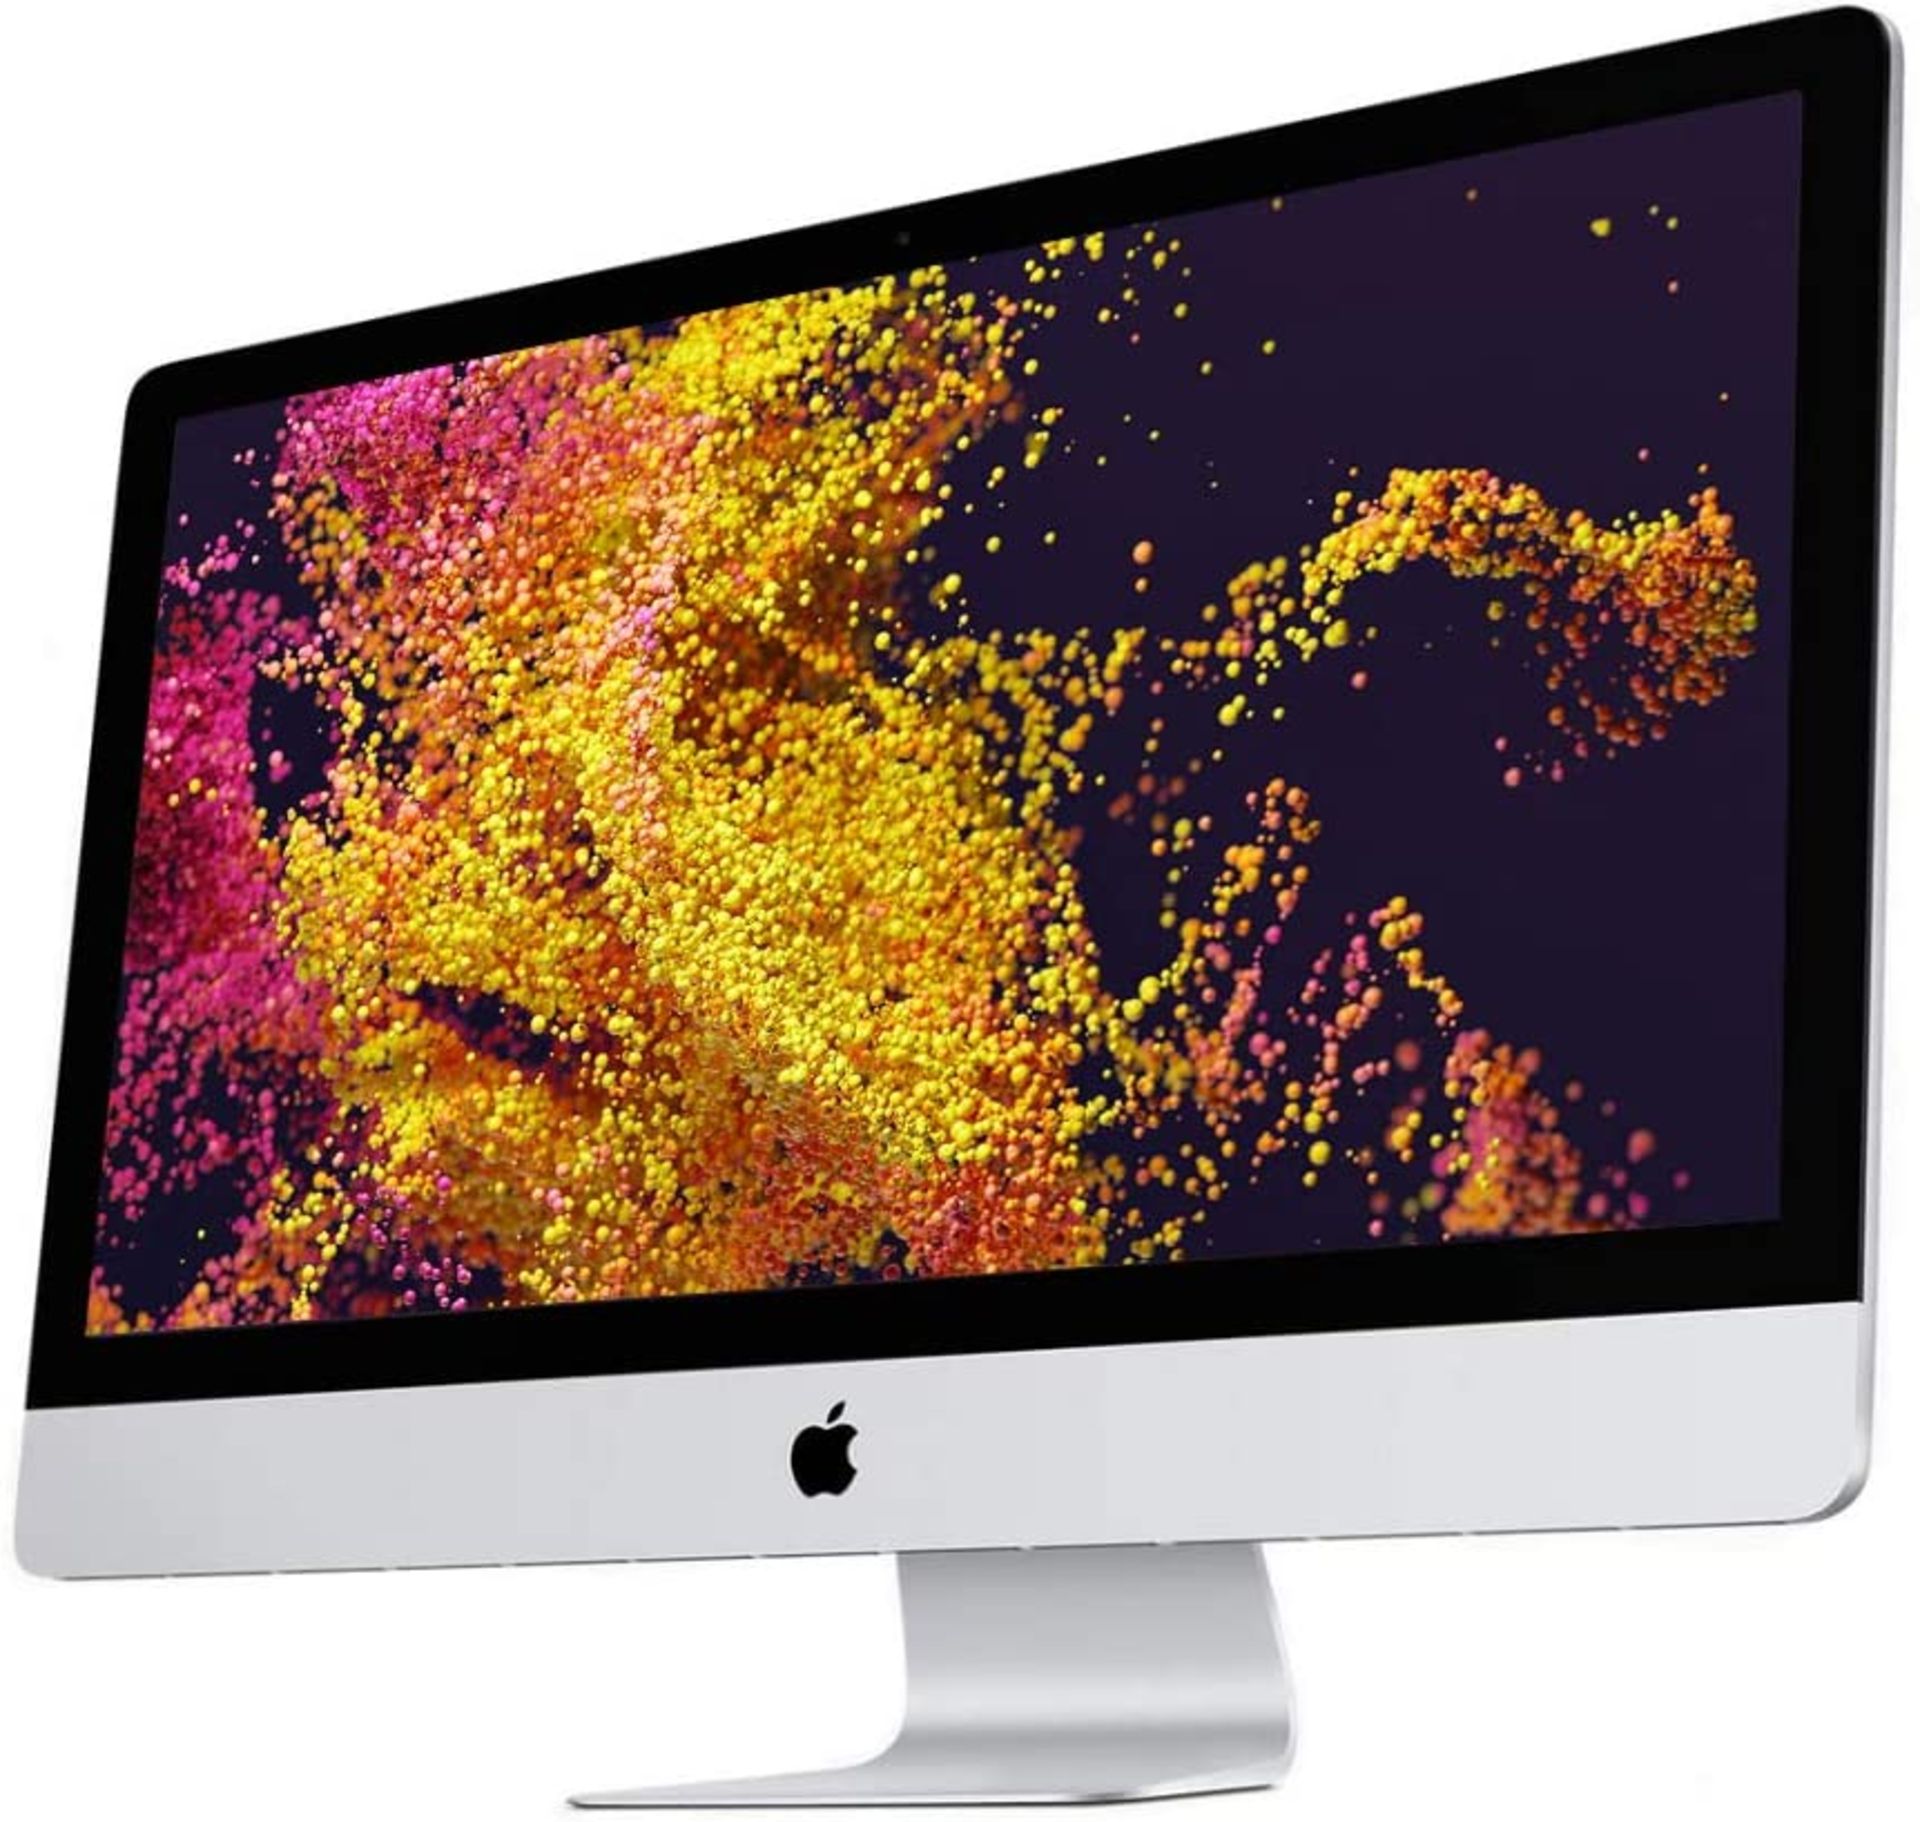 APPLE IMAC 20'' CORE 2 DUO 3GB 250GB Radeon. Complete Reset With Mac OS X, And Microsoft Office